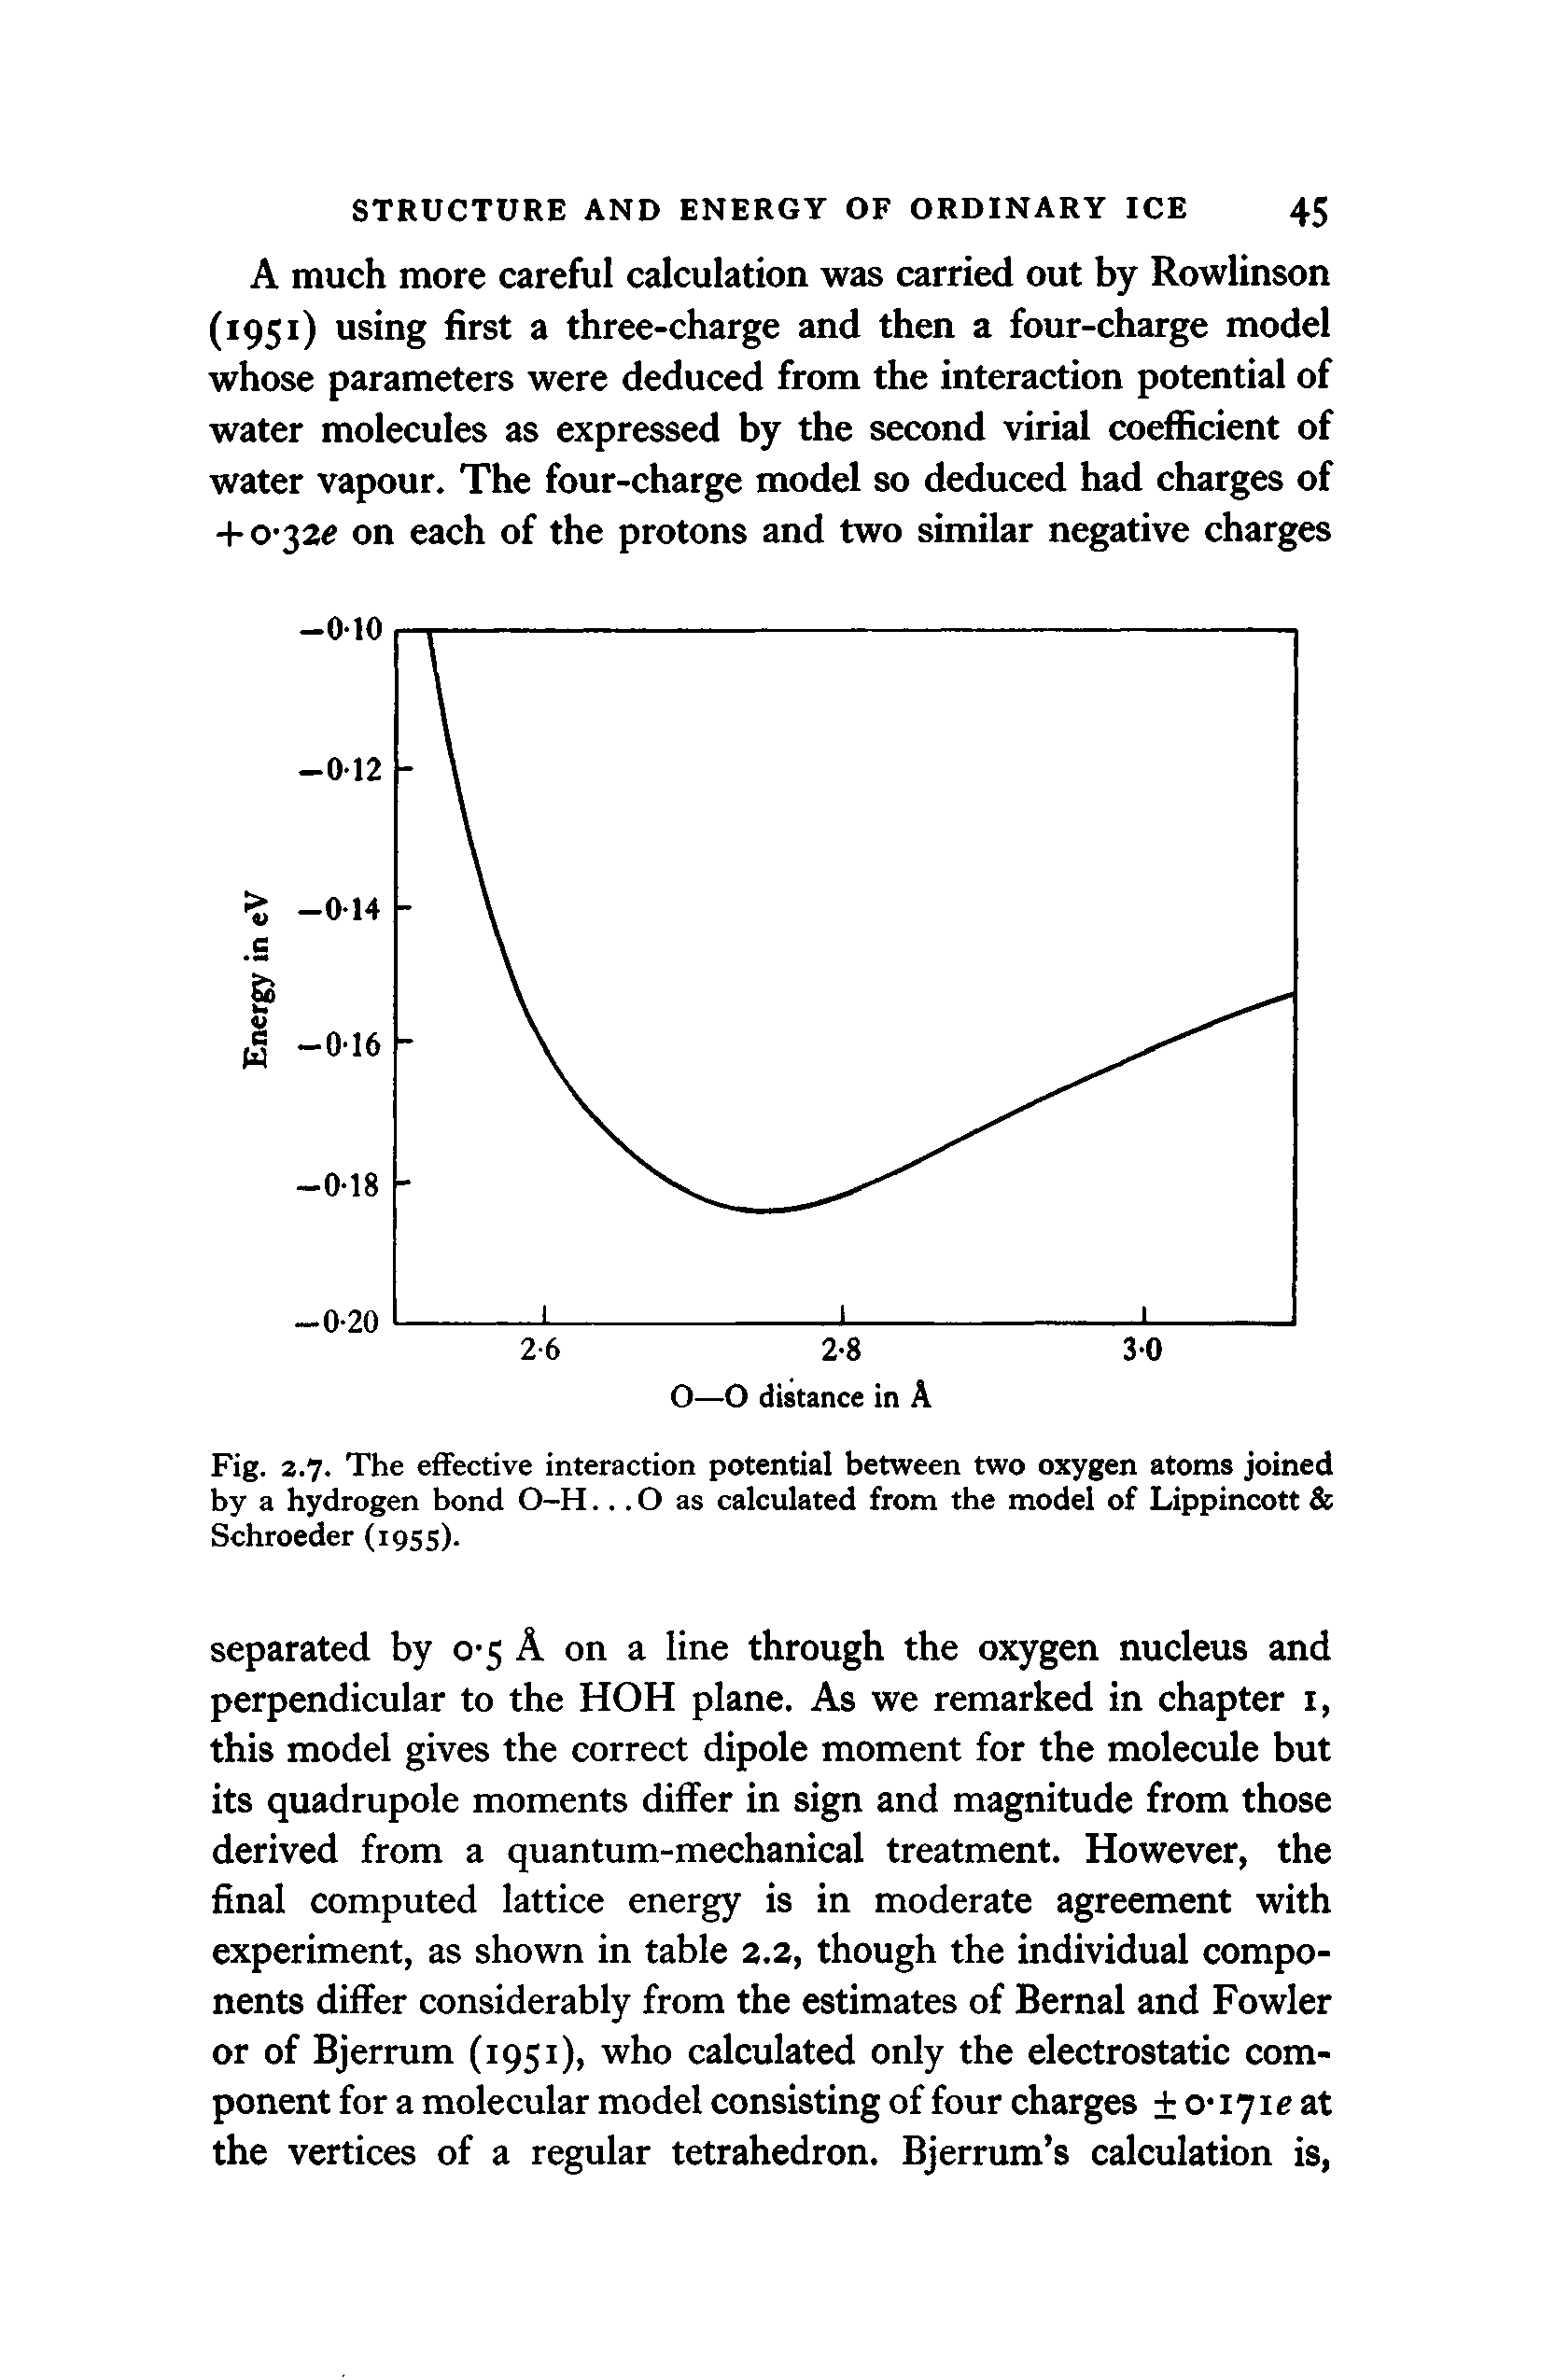 Fig. 2.7. The effective interaction potential between two oxygen atoms joined by a hydrogen hond O-H... O as calculated from the model of Lippincott Schroeder (1955).